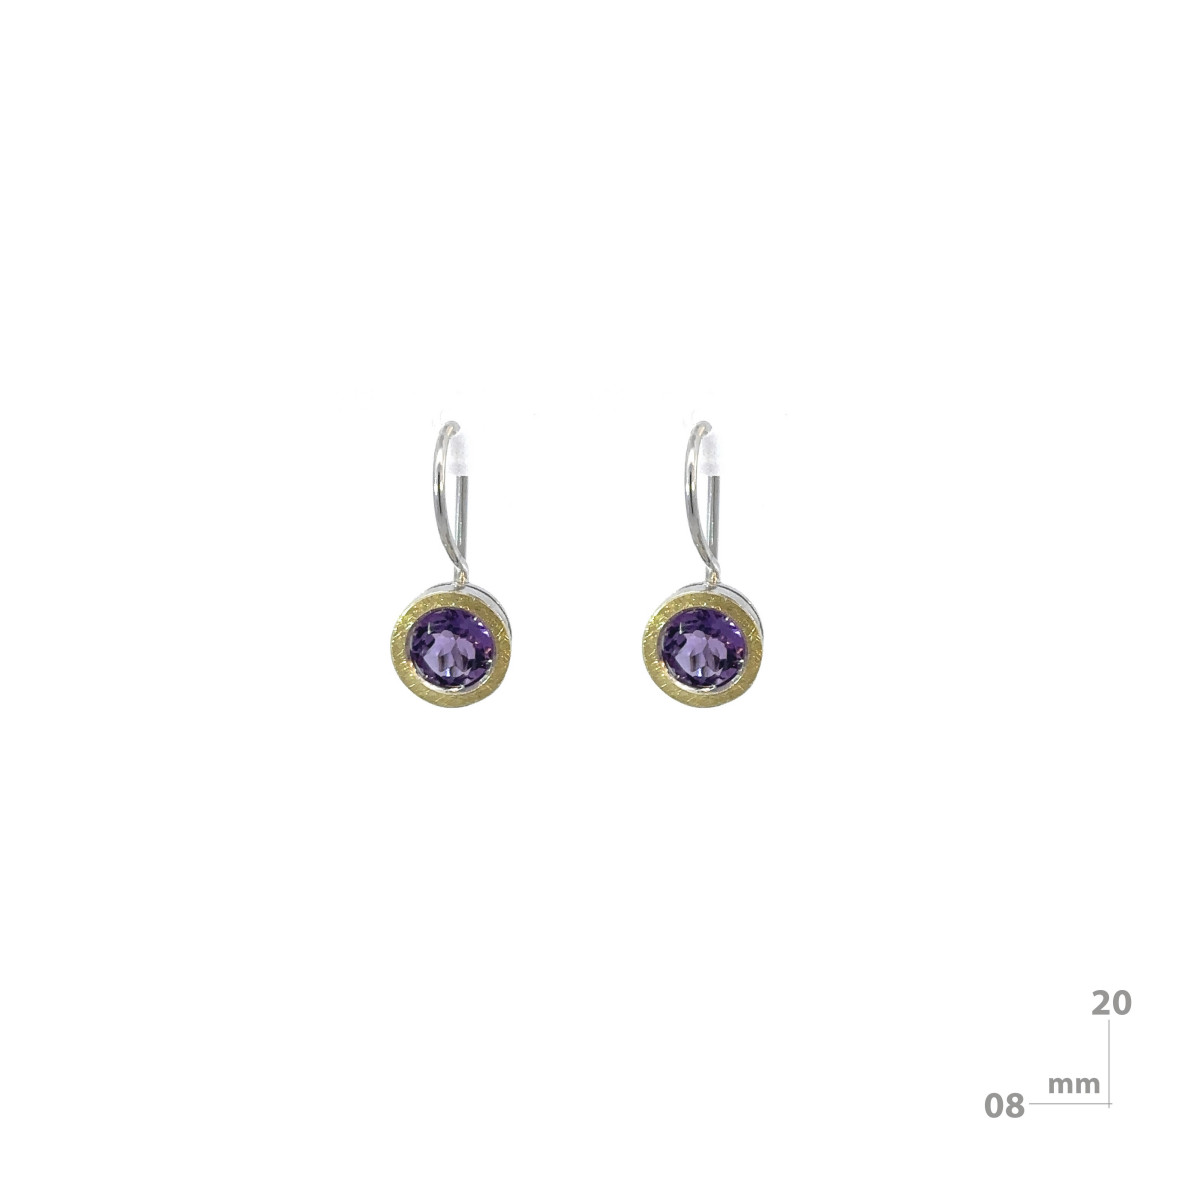 Earrings made of silver, 18k gold and amethyst